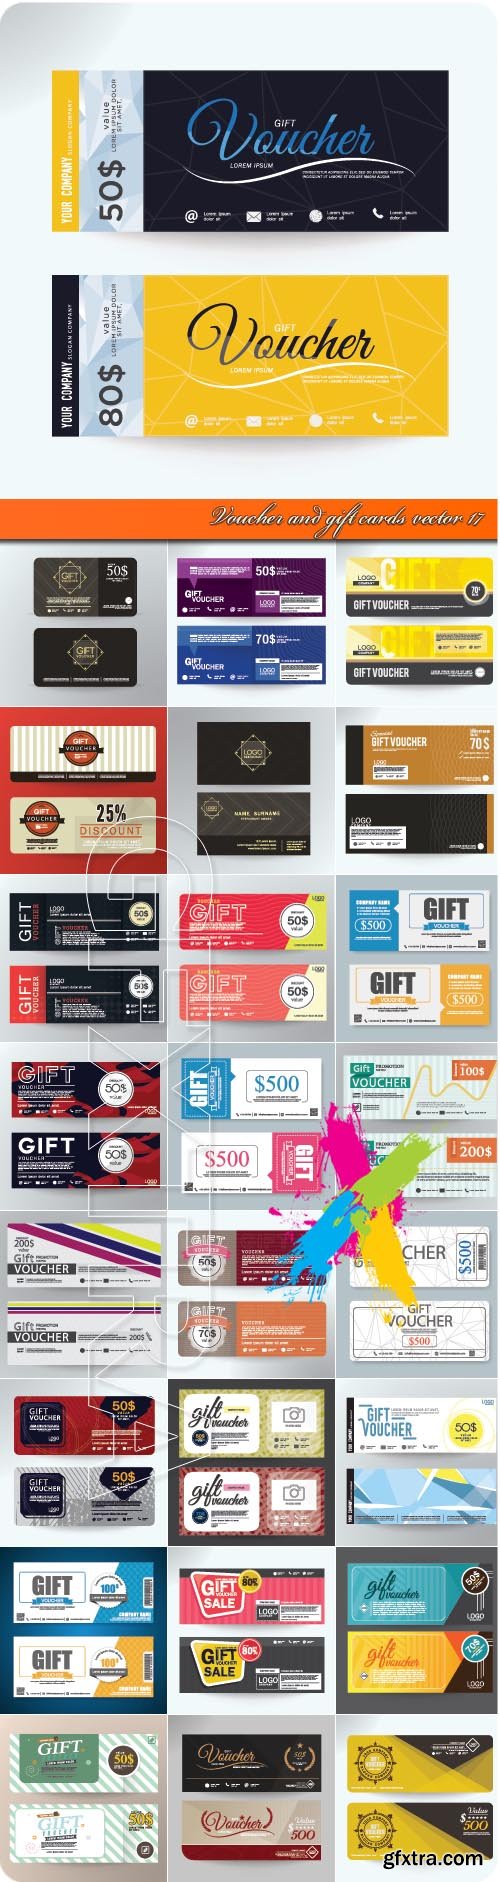 Voucher and gift cards vector 17